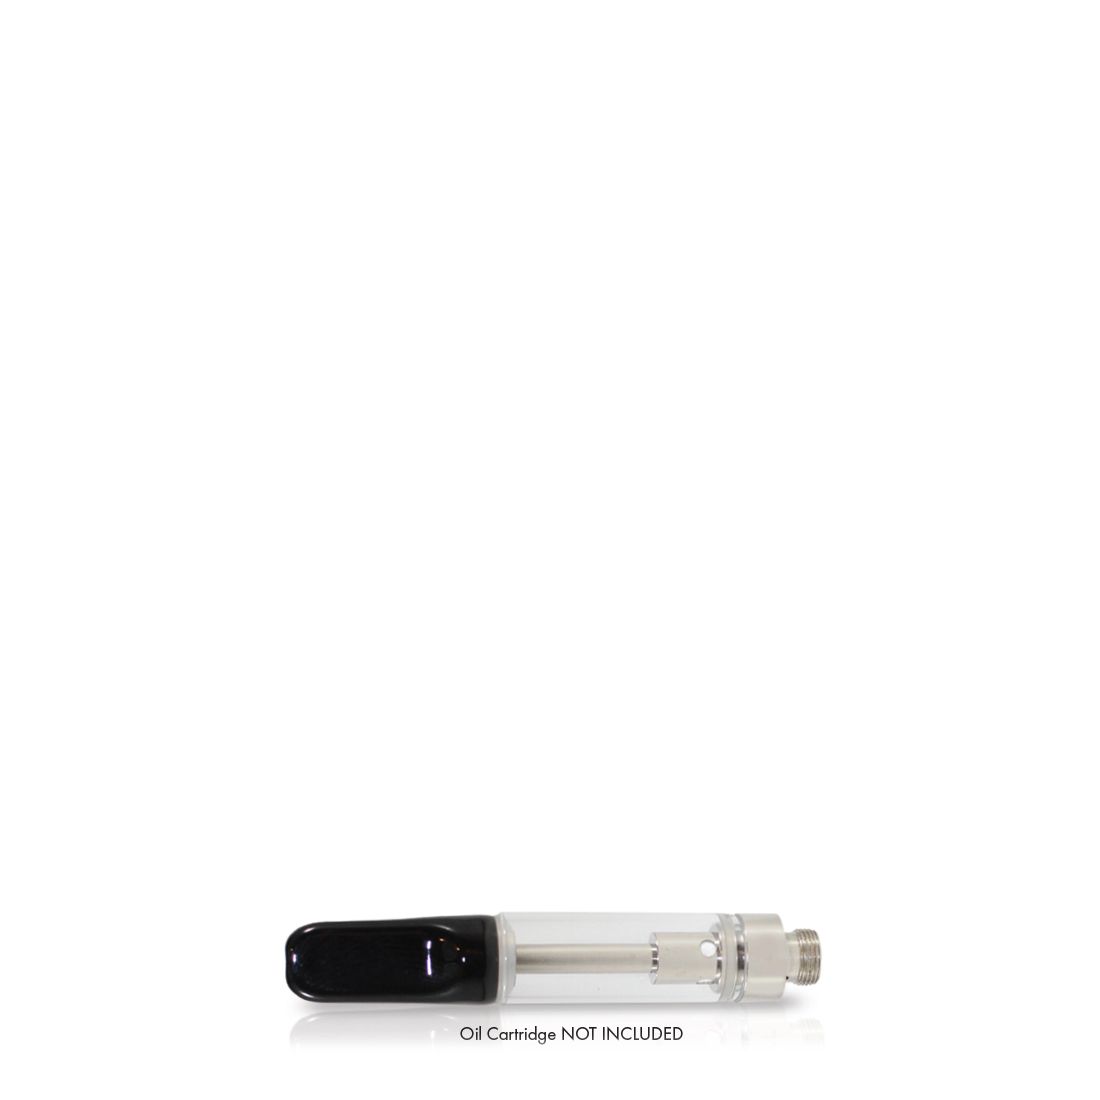 VERB 510 FLIP Threaded Battery Oil Vaporizer (Color Options Available) (B2B)